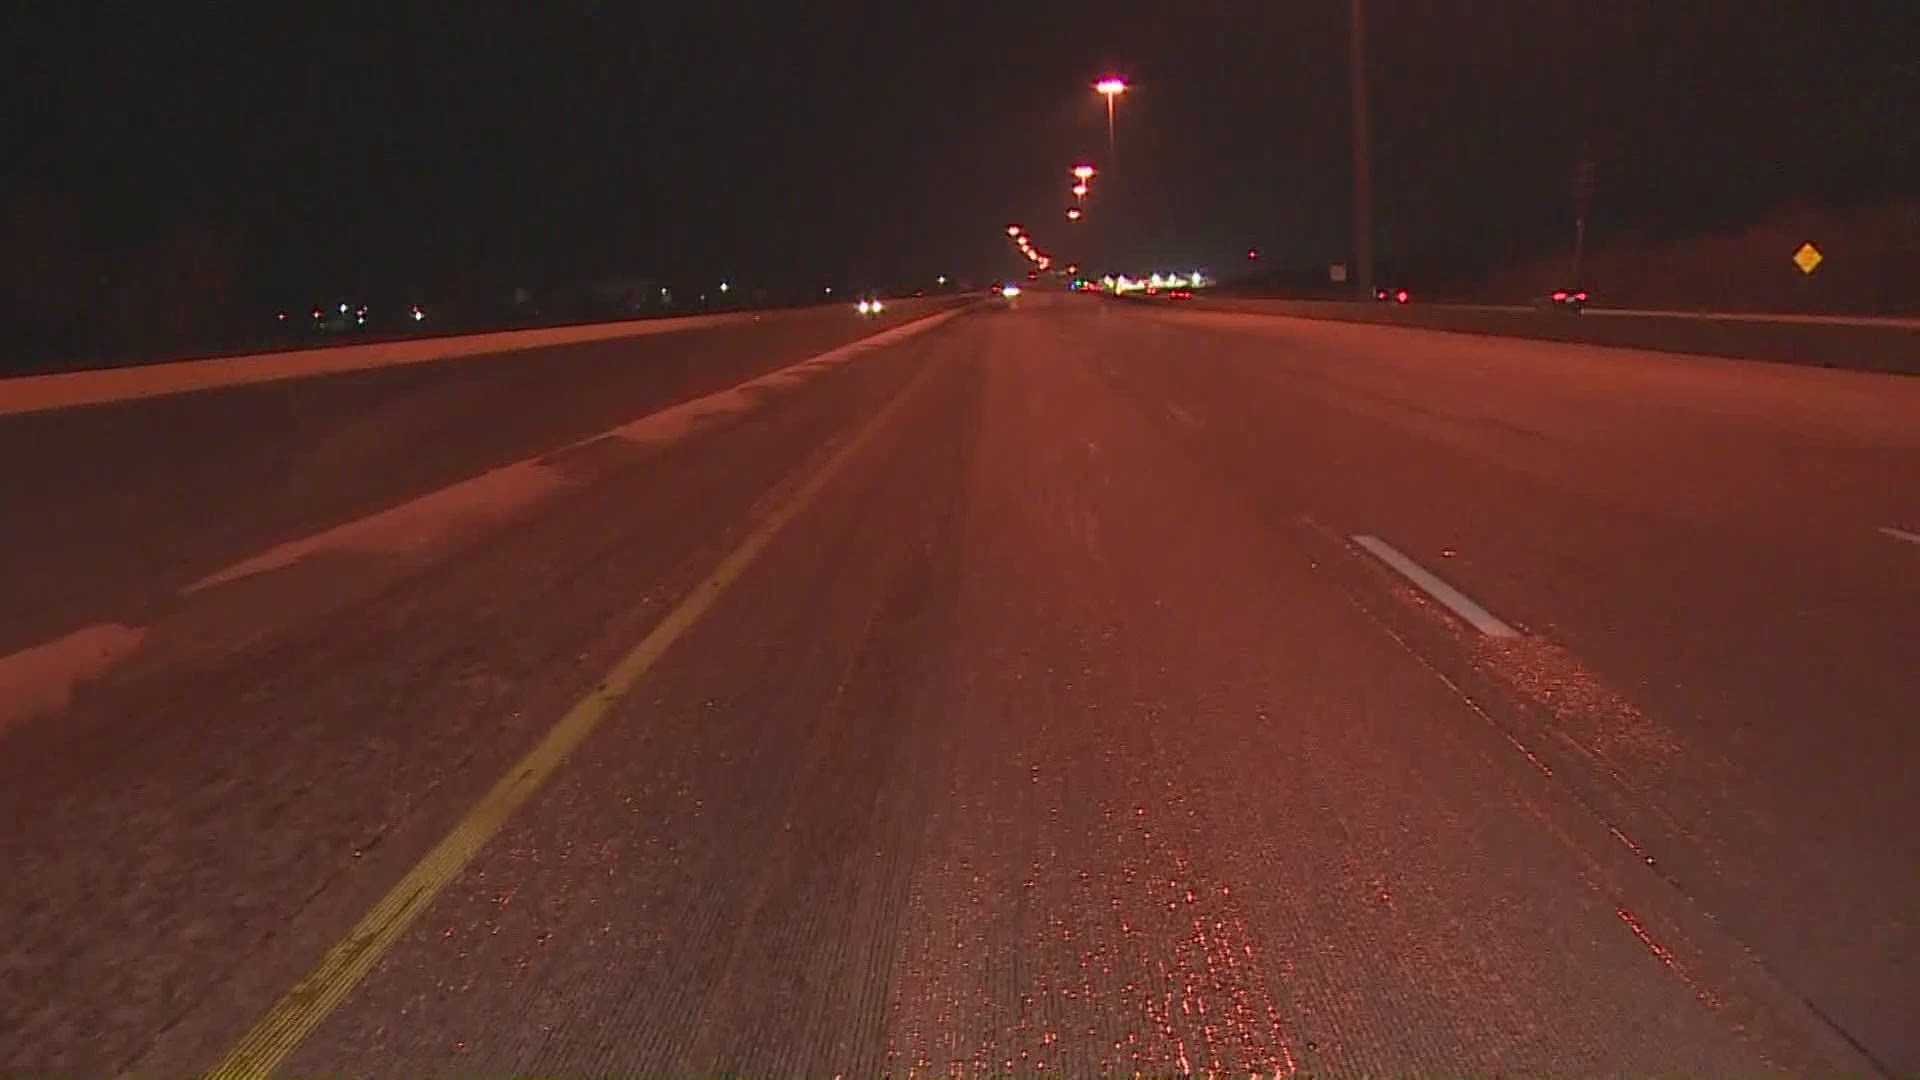 #HTownRush's Michelle Choi is tracking icy conditions on Highway 290 westbound near Grand Parkway/99